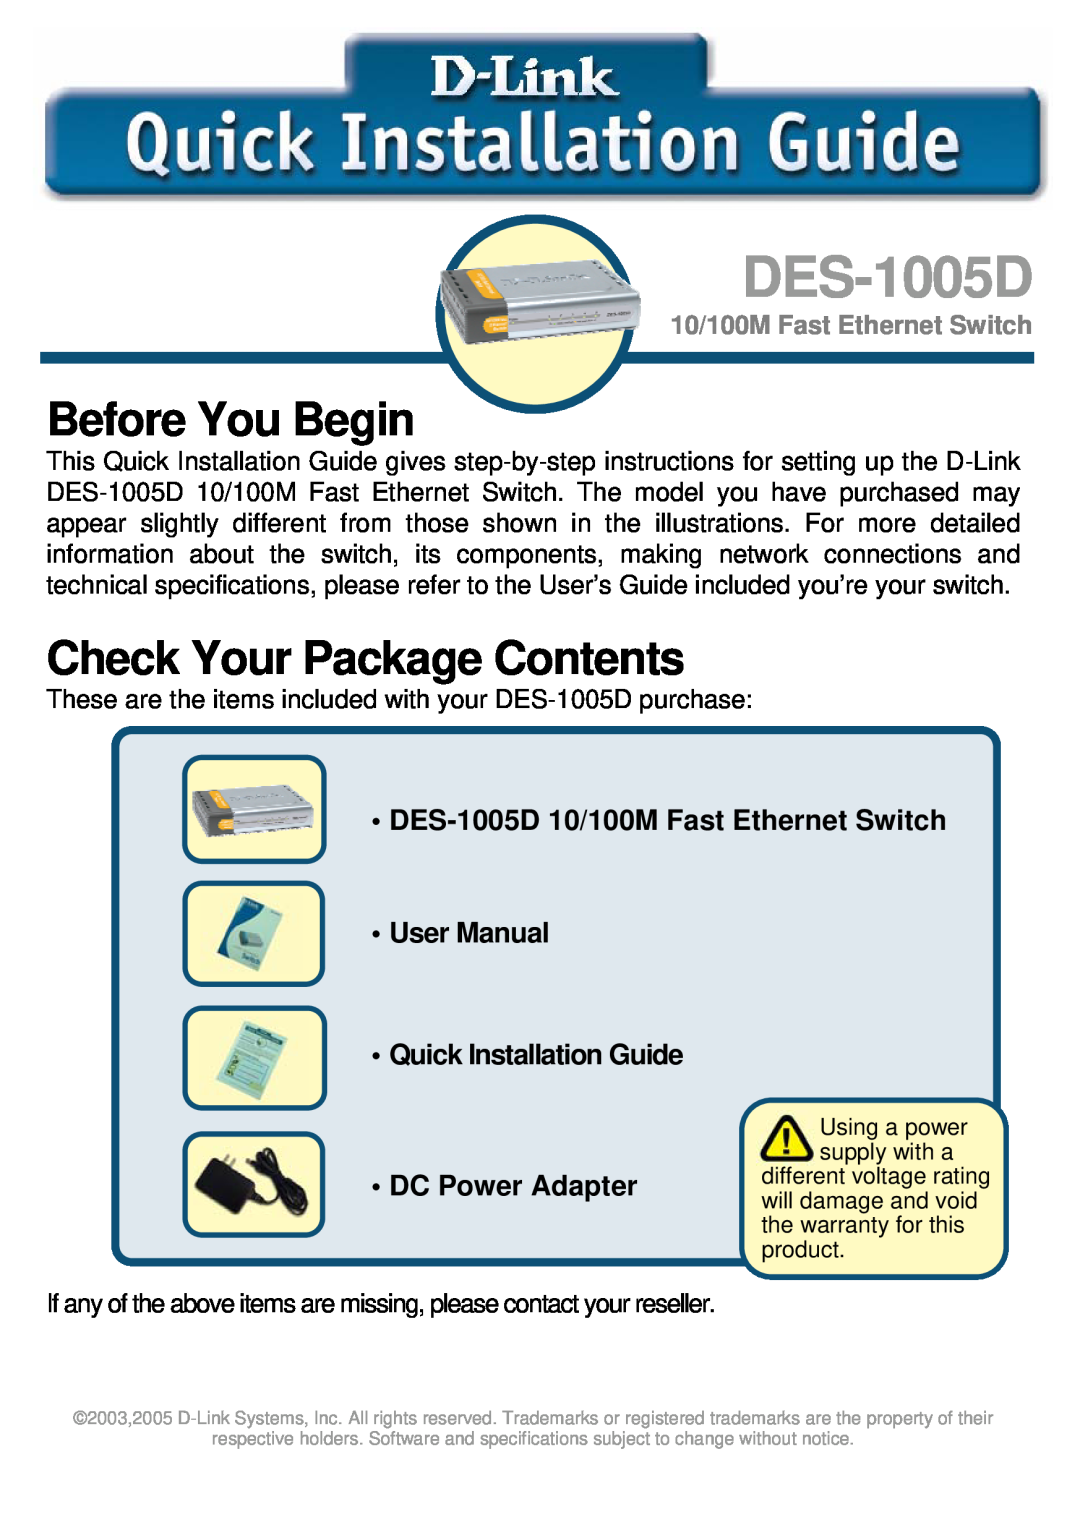 D-Link DES-1005D technical specifications Before You Begin, Check Your Package Contents, 10/100M Fast Ethernet Switch 